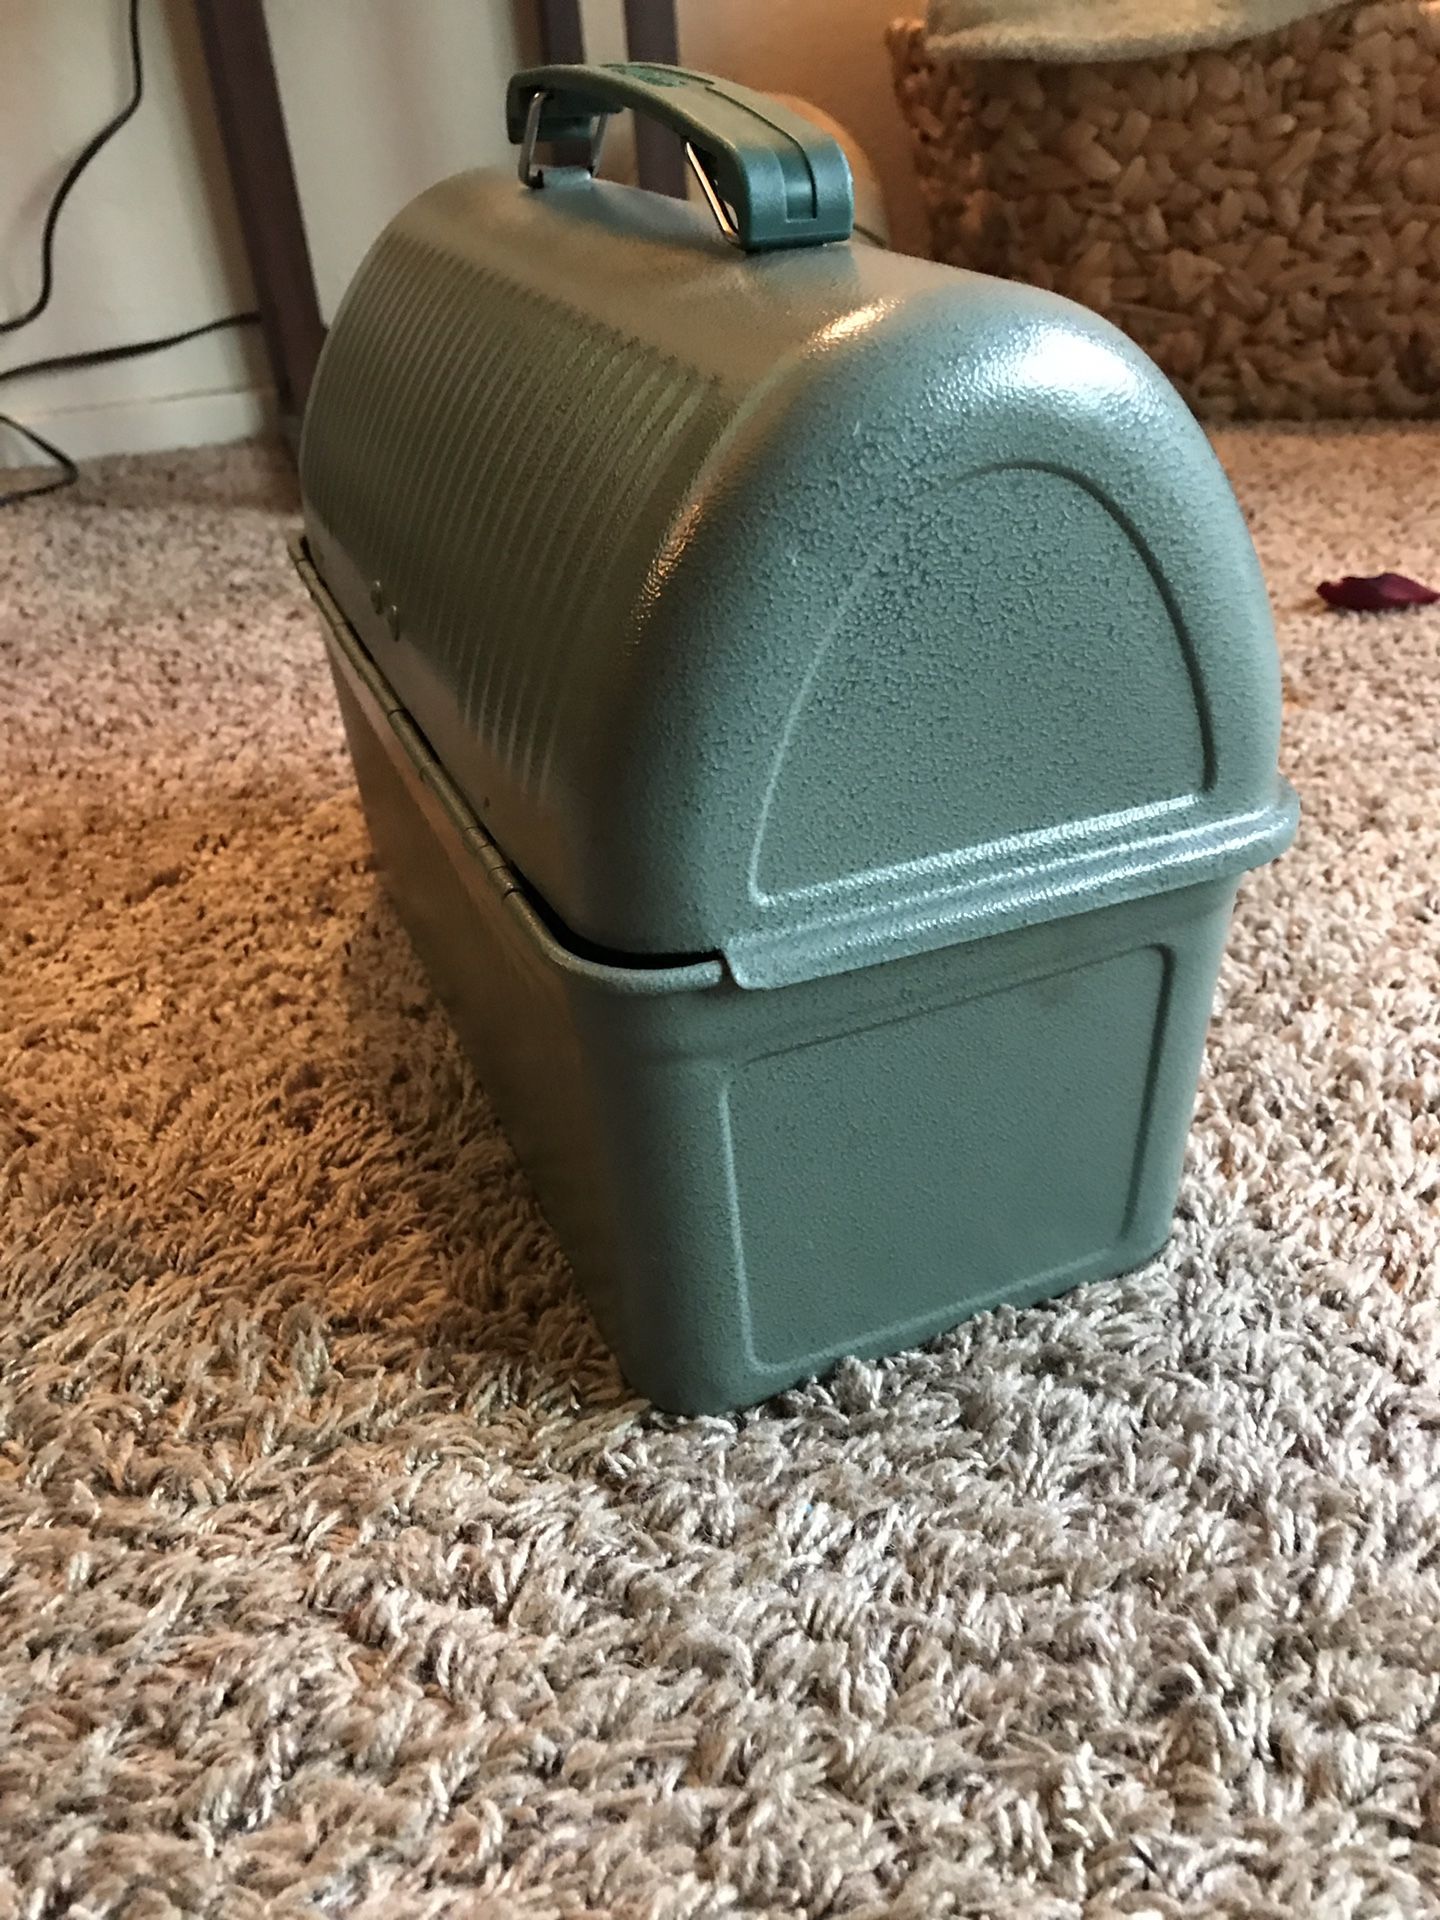 Stanley To-Go Food Jar for Sale in San Jose, CA - OfferUp